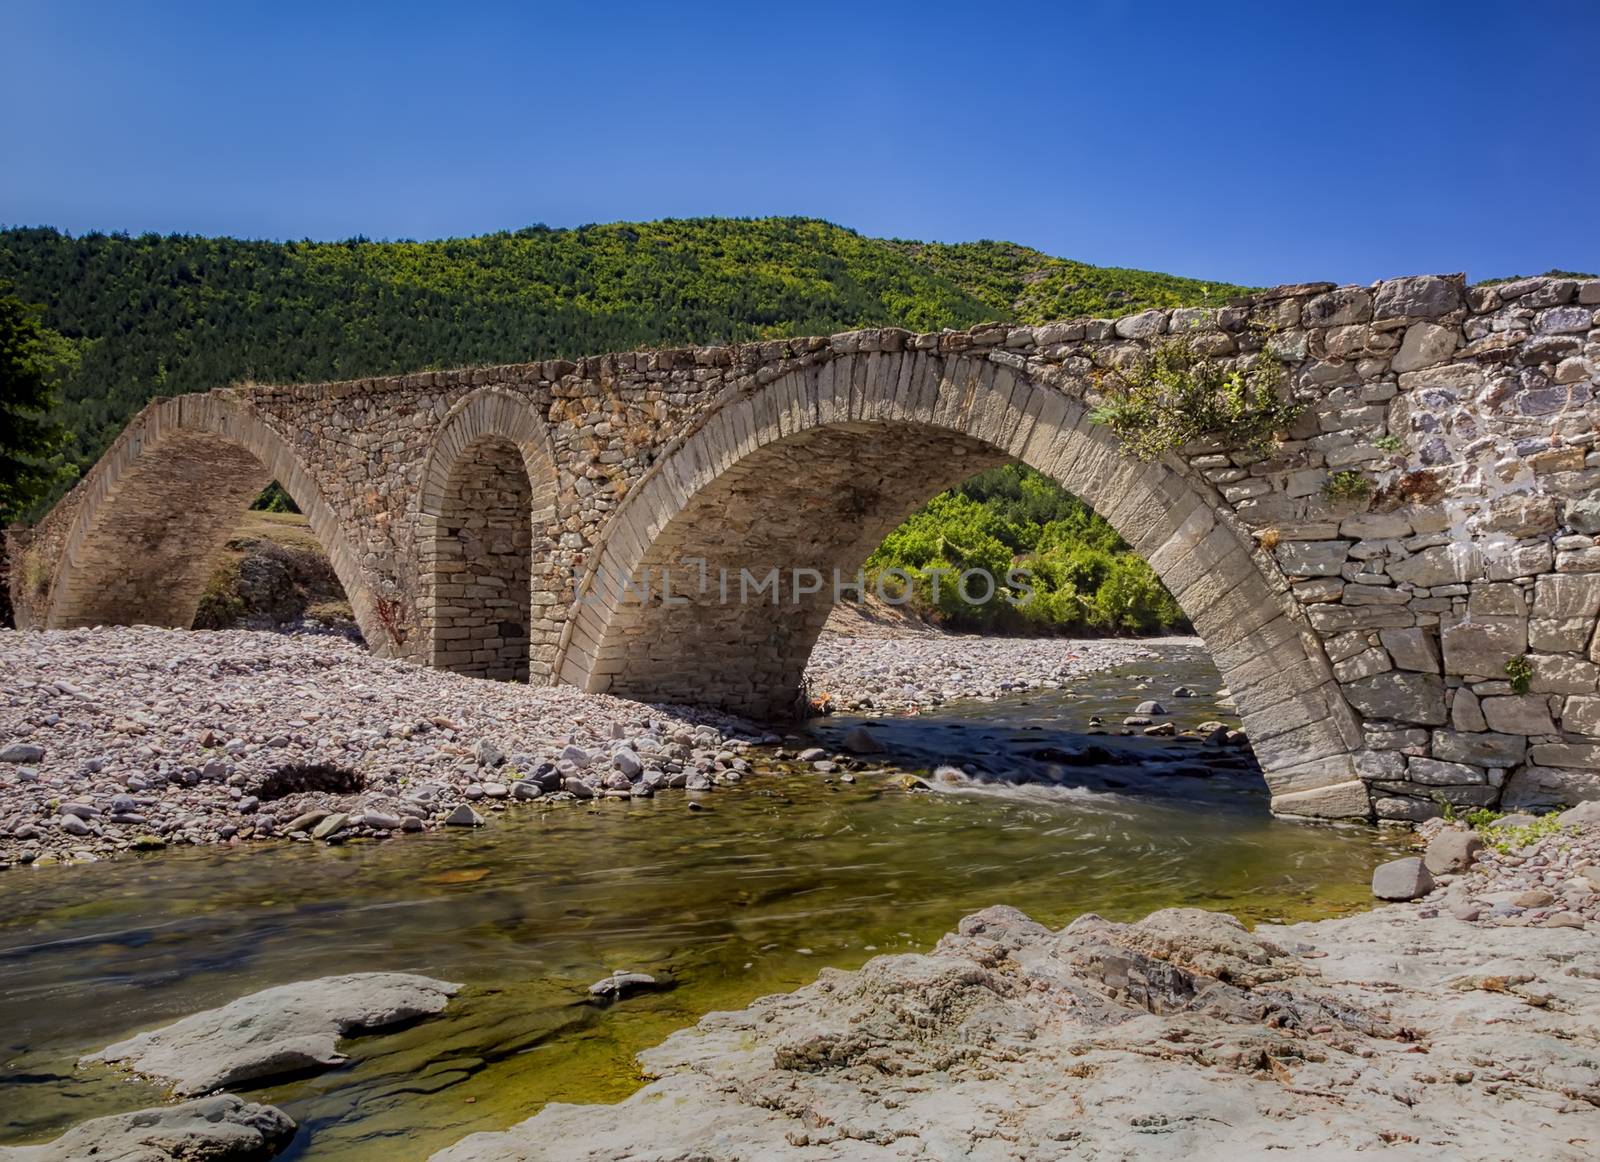 day view of old Roman stone bridge by EdVal